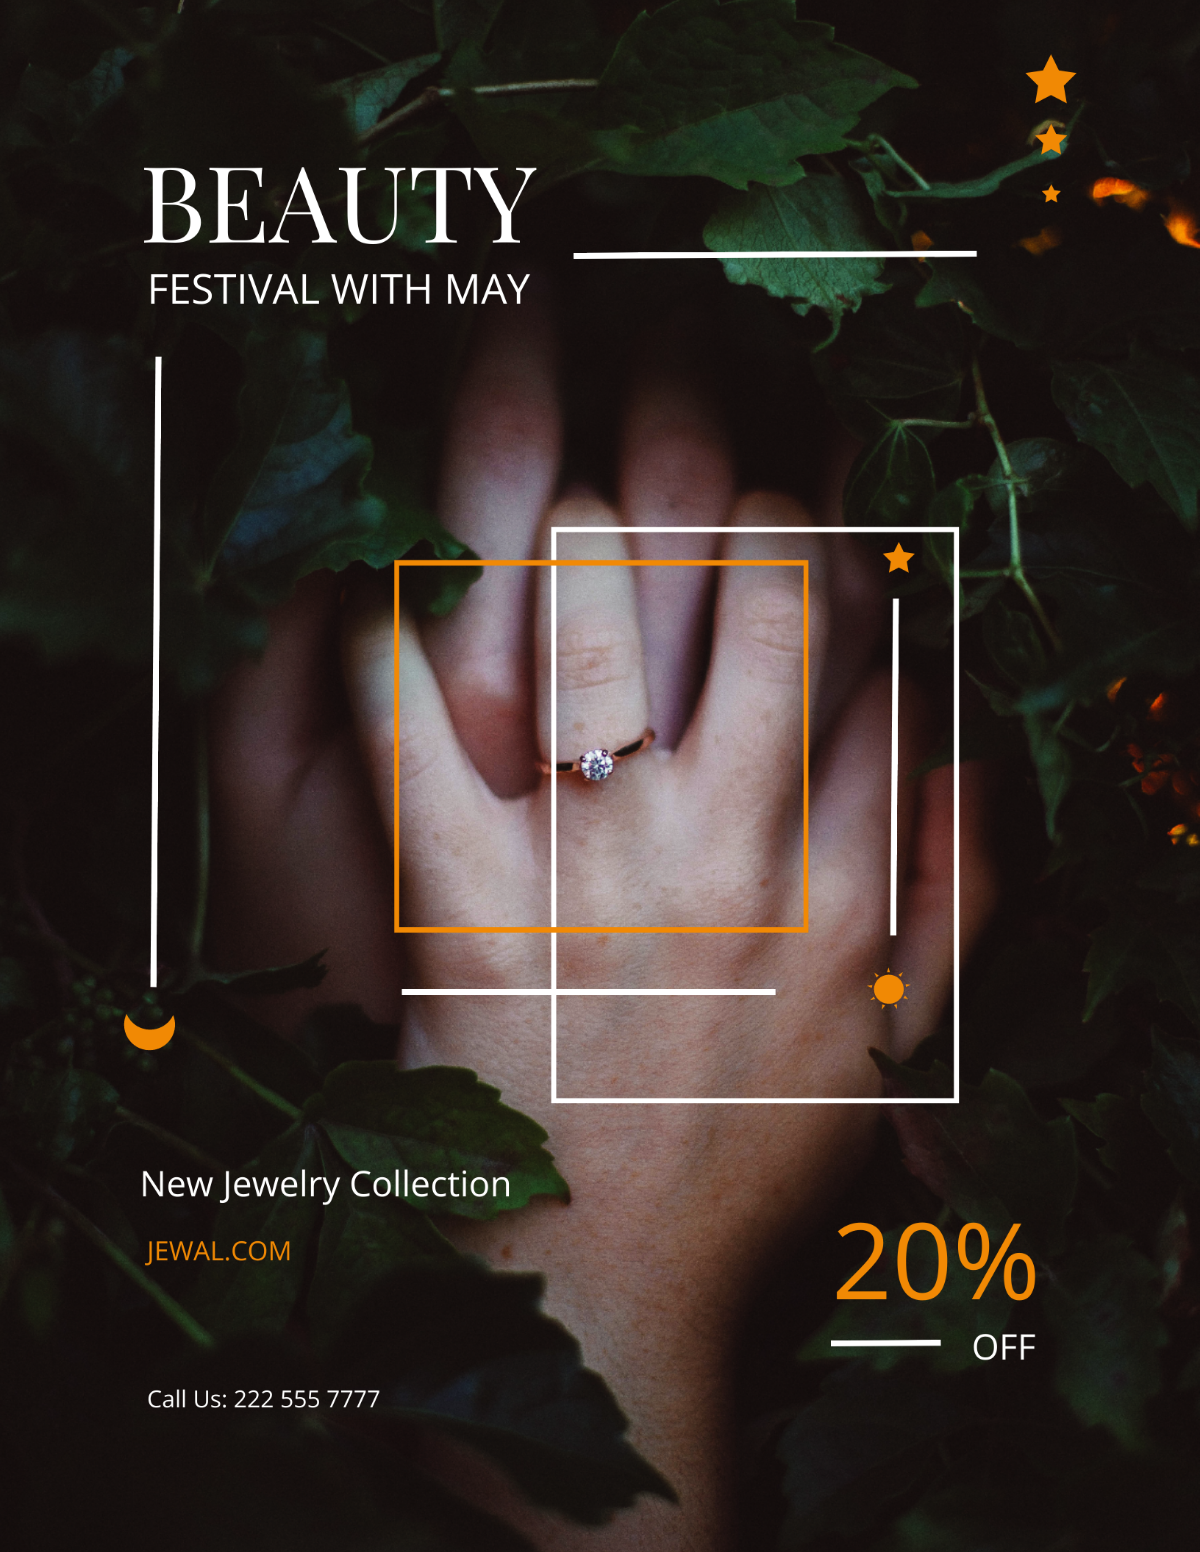 Jewelry Shop Flyer Template